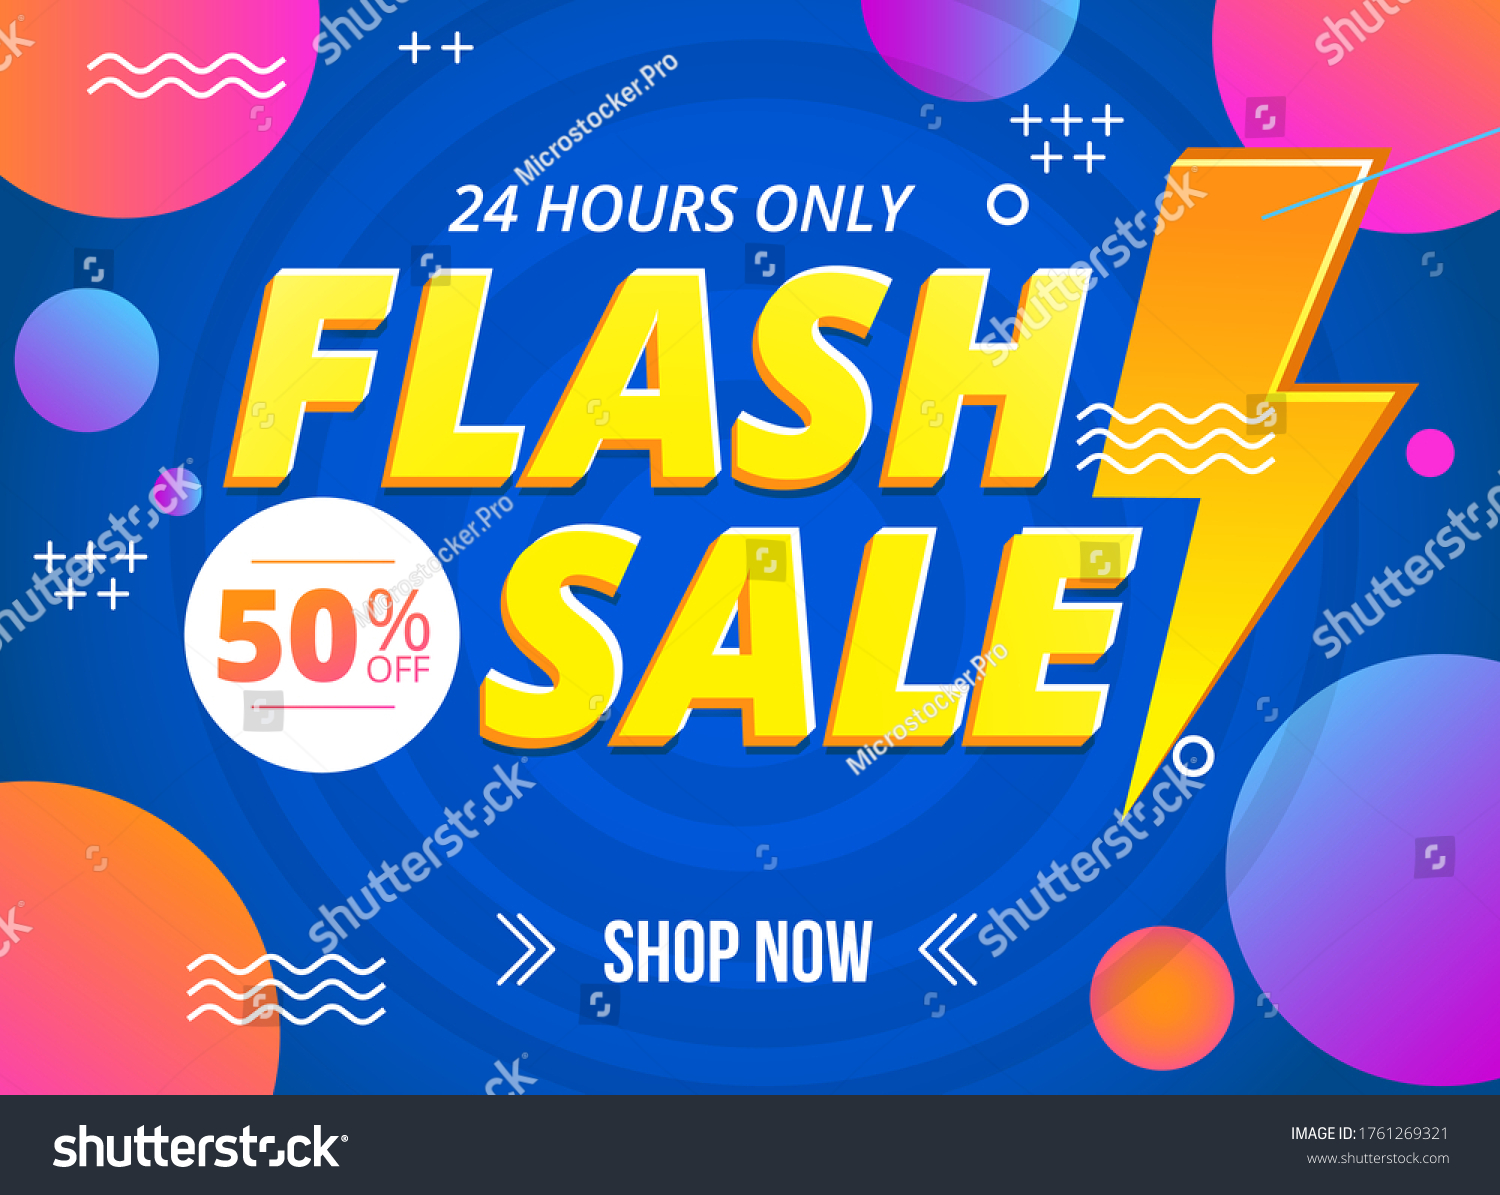 SVG of Bright flash sale banner template with sign vector illustration. 24 hours only discount flat style. Shop now. Colourful decoration with circles and waves. Shopping concept svg